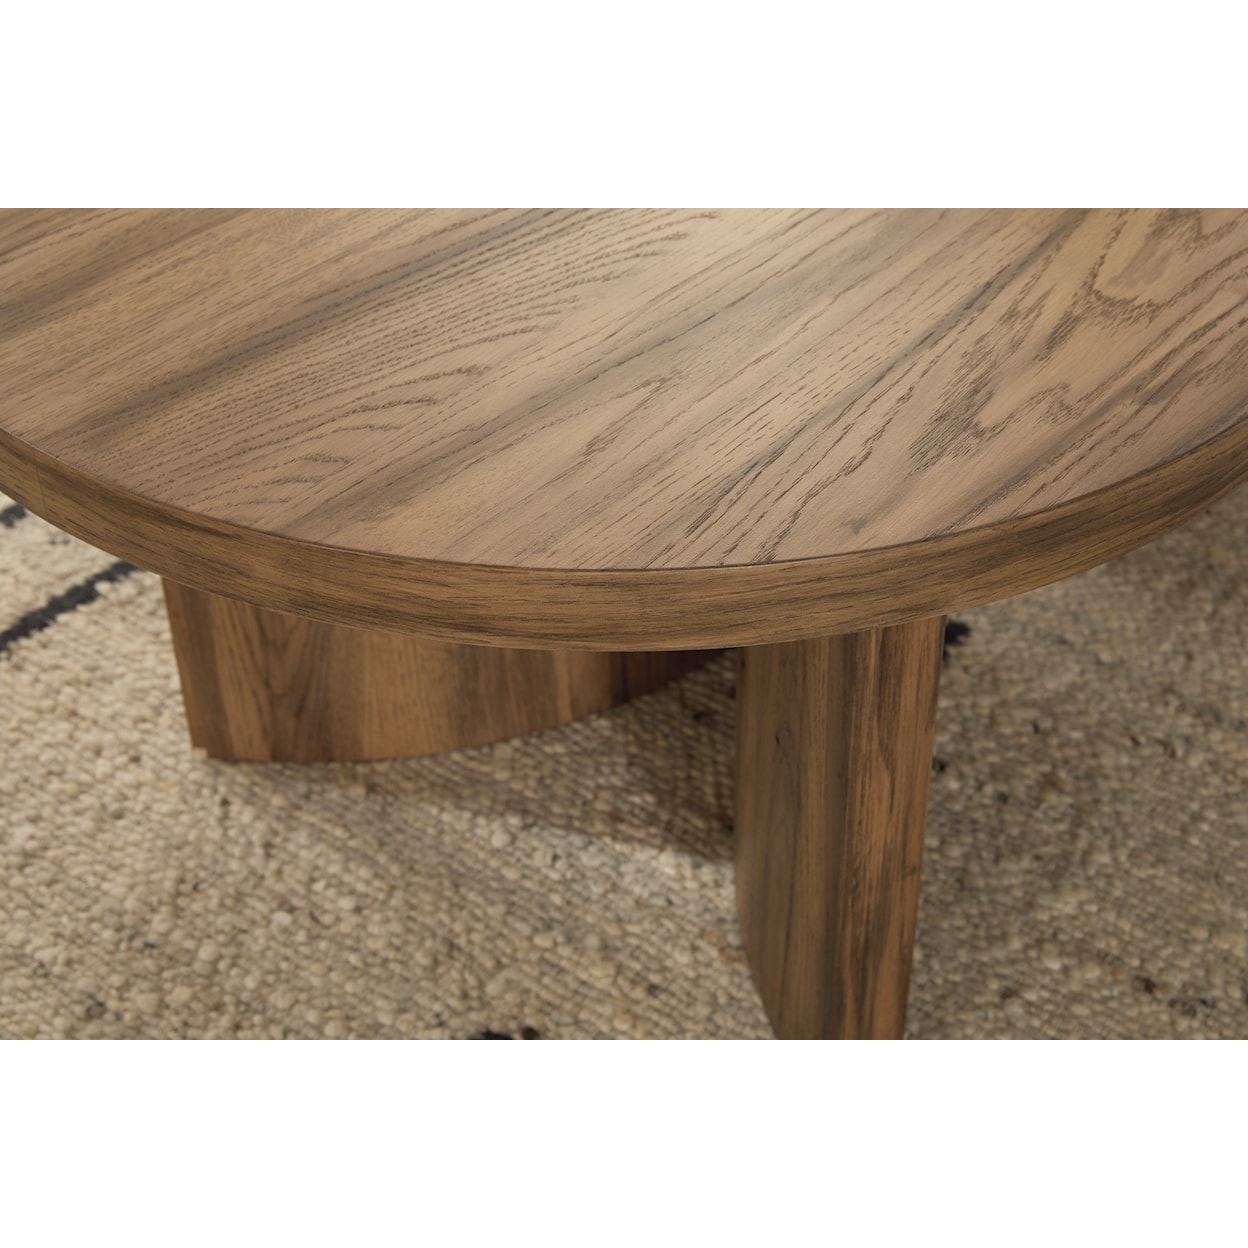 Signature Design by Ashley Austanny Oval Coffee Table